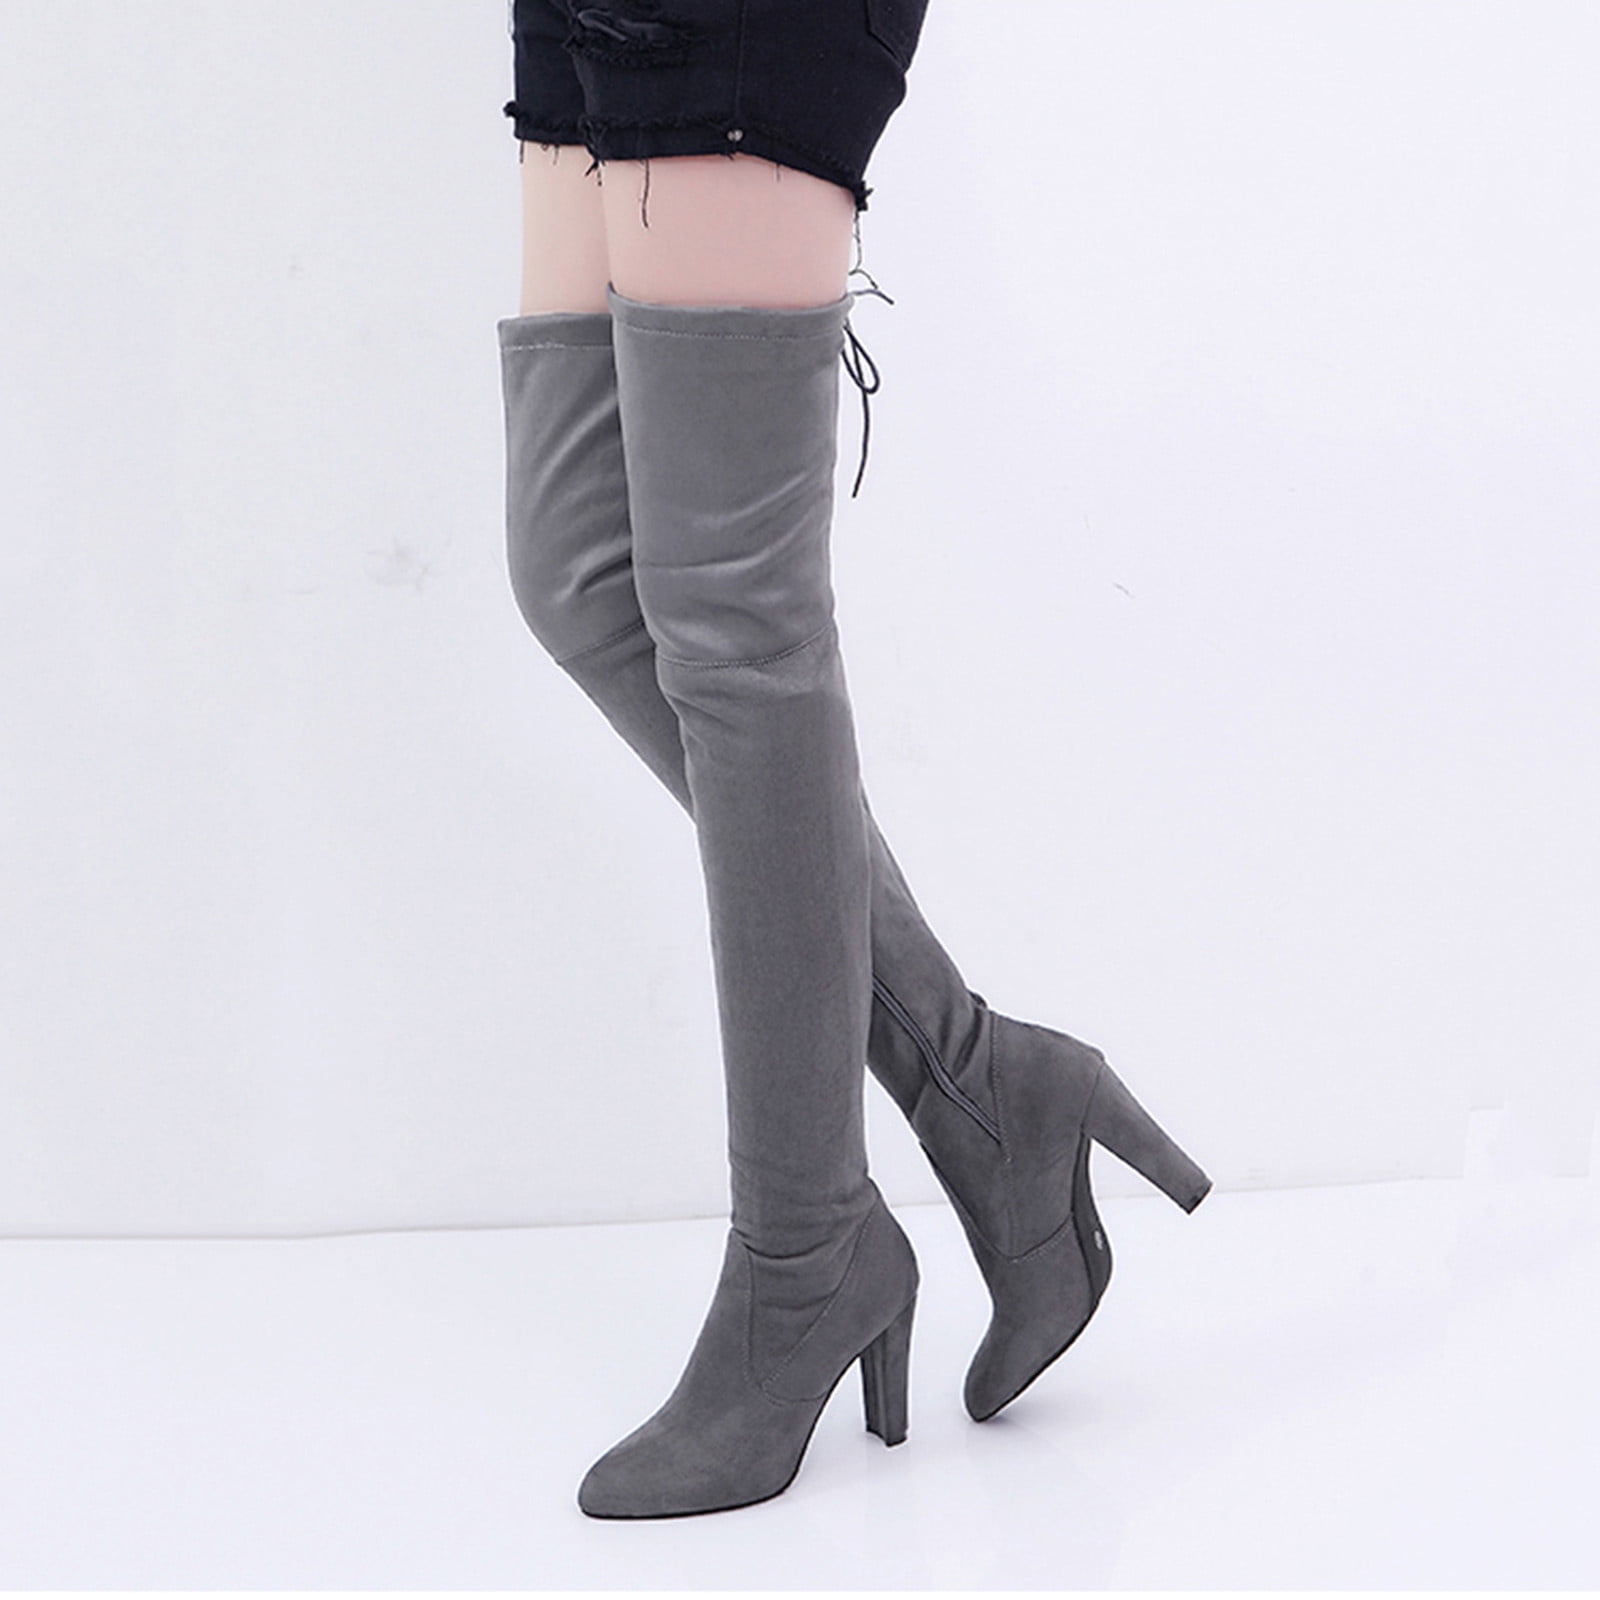 Buy Froh Feet women Fashion Over Knee High Boots Block Heel Stylish Solid  Heels Long Boots For Womens & Girls at Amazon.in